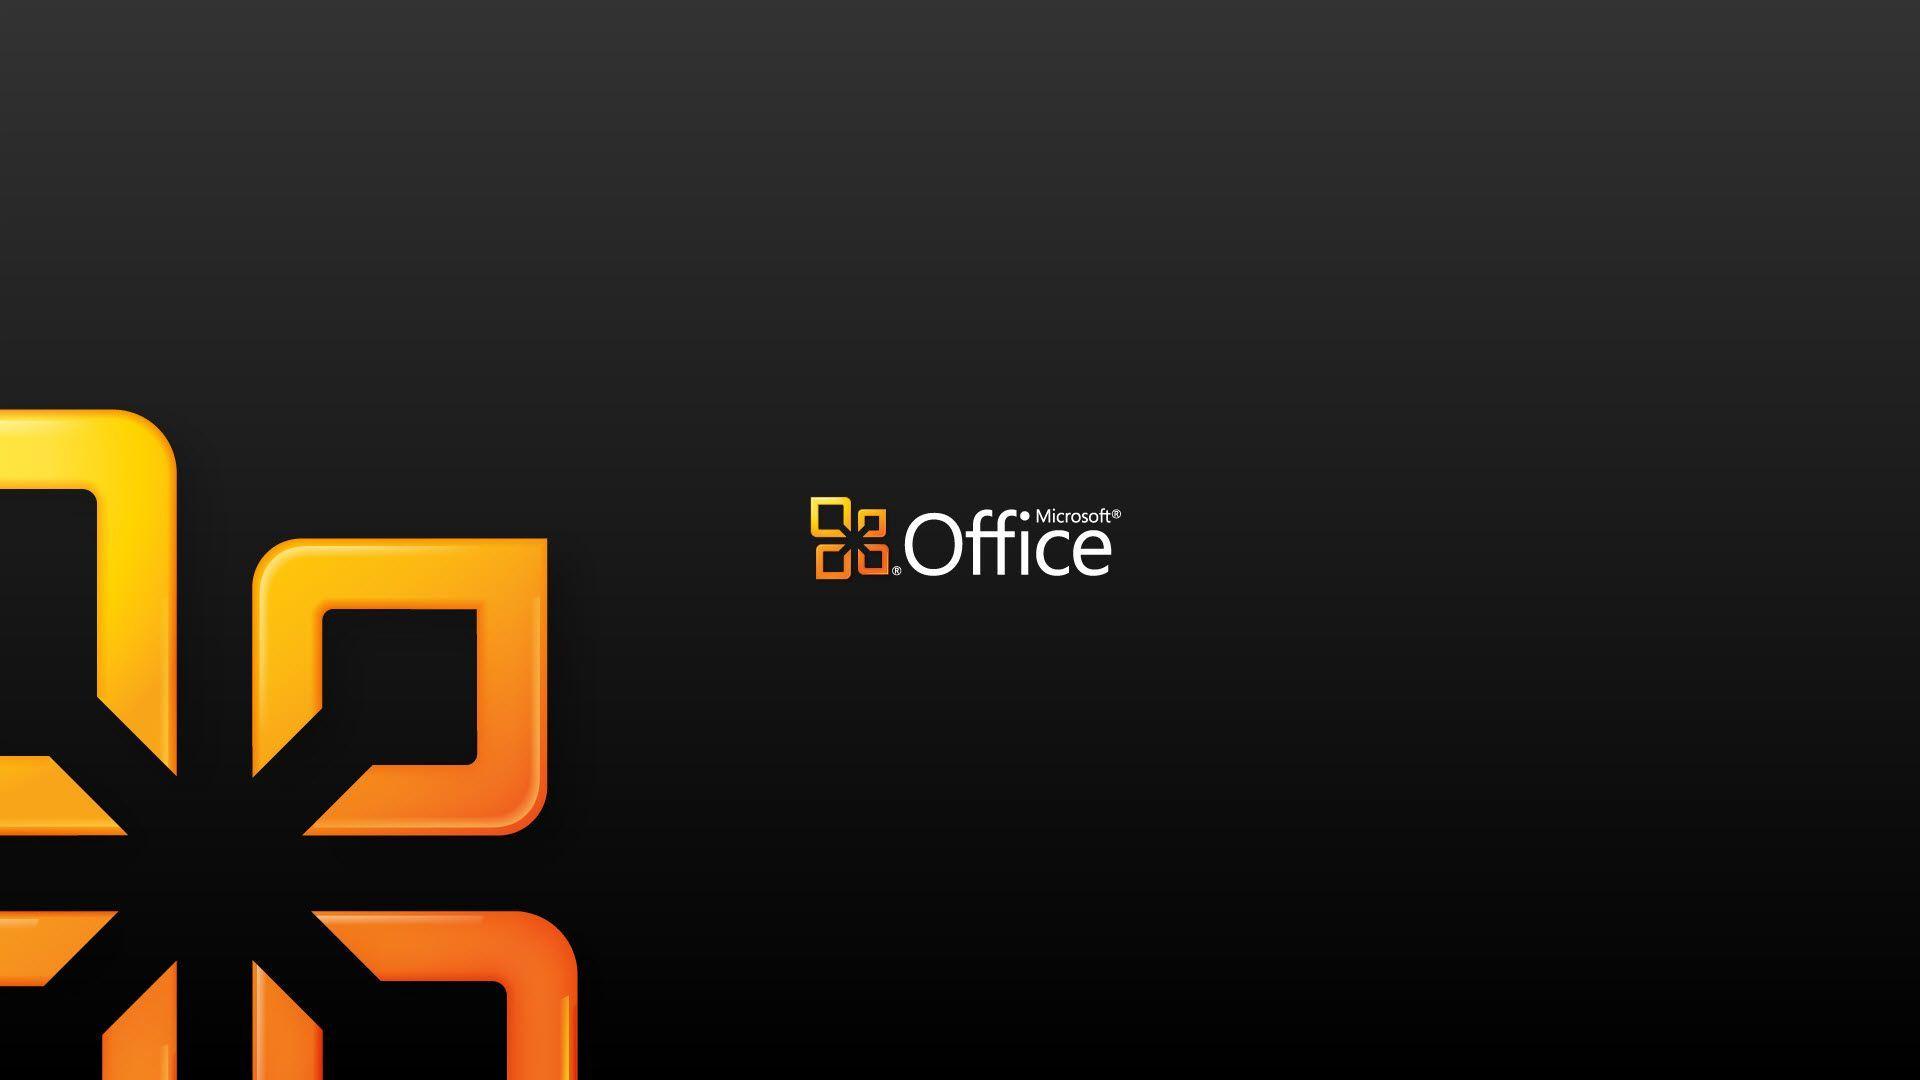 microsoft office 365 themes download free